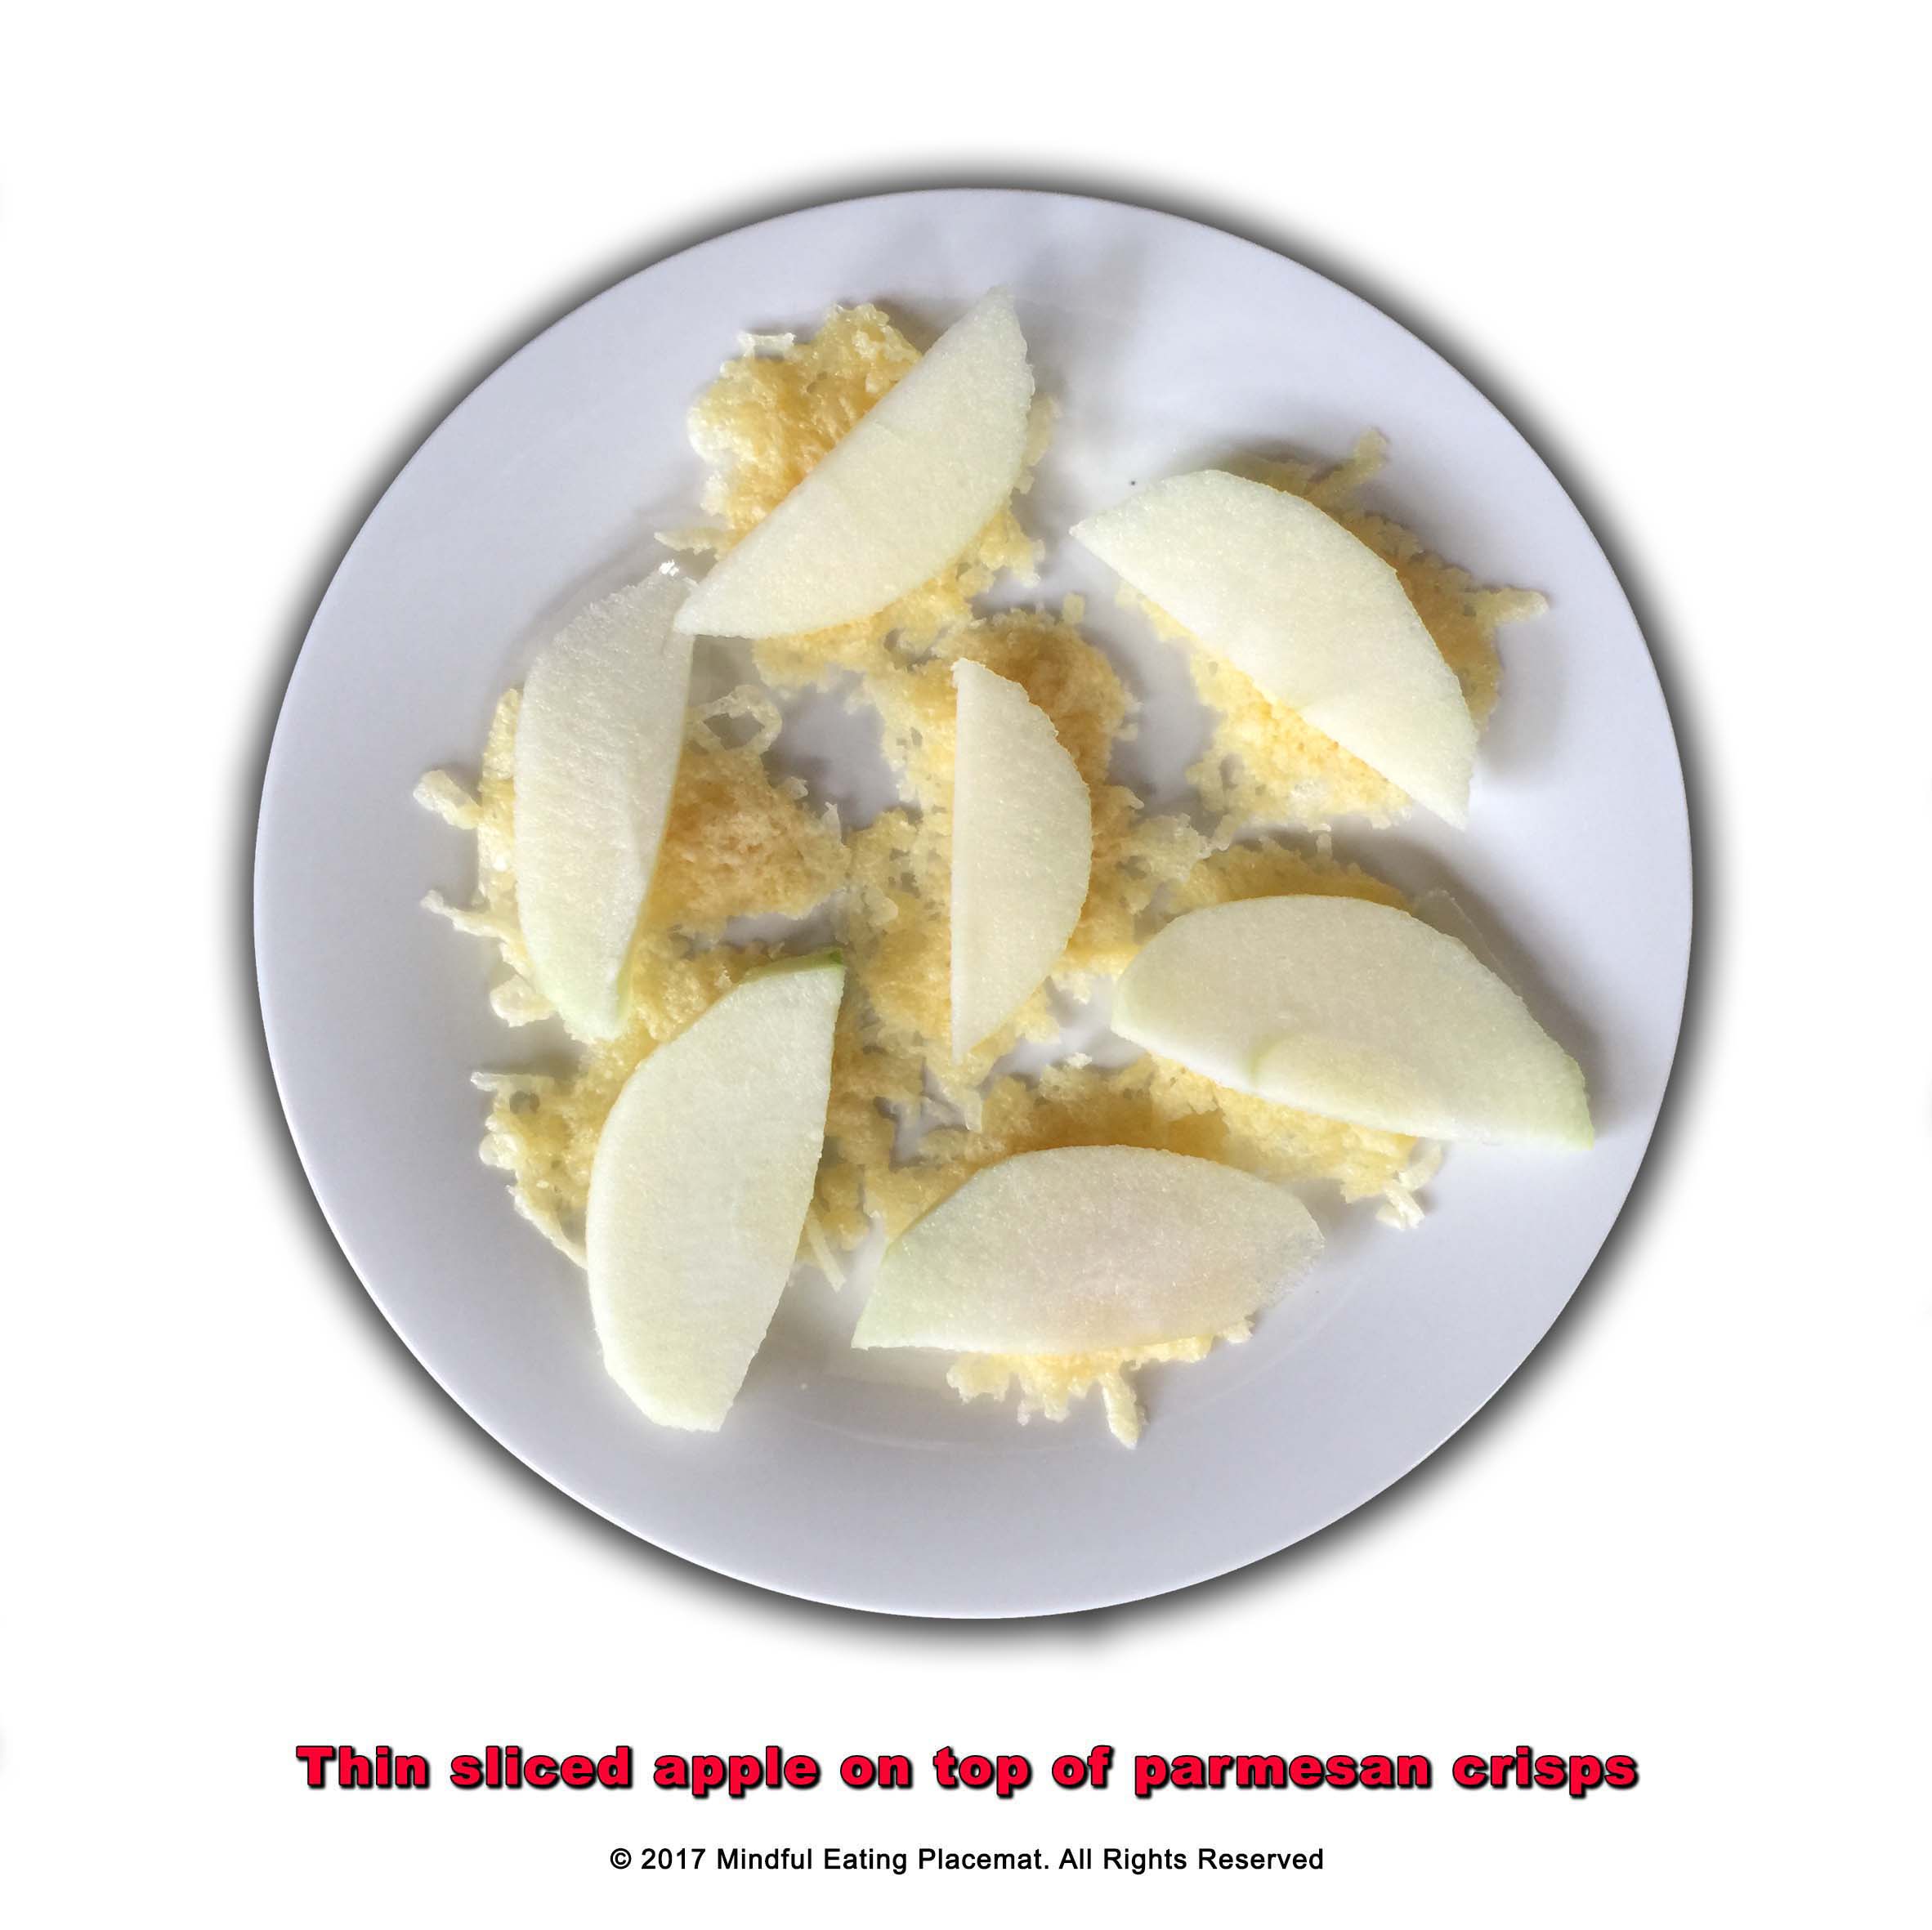 Parmesan chips with sliced apple